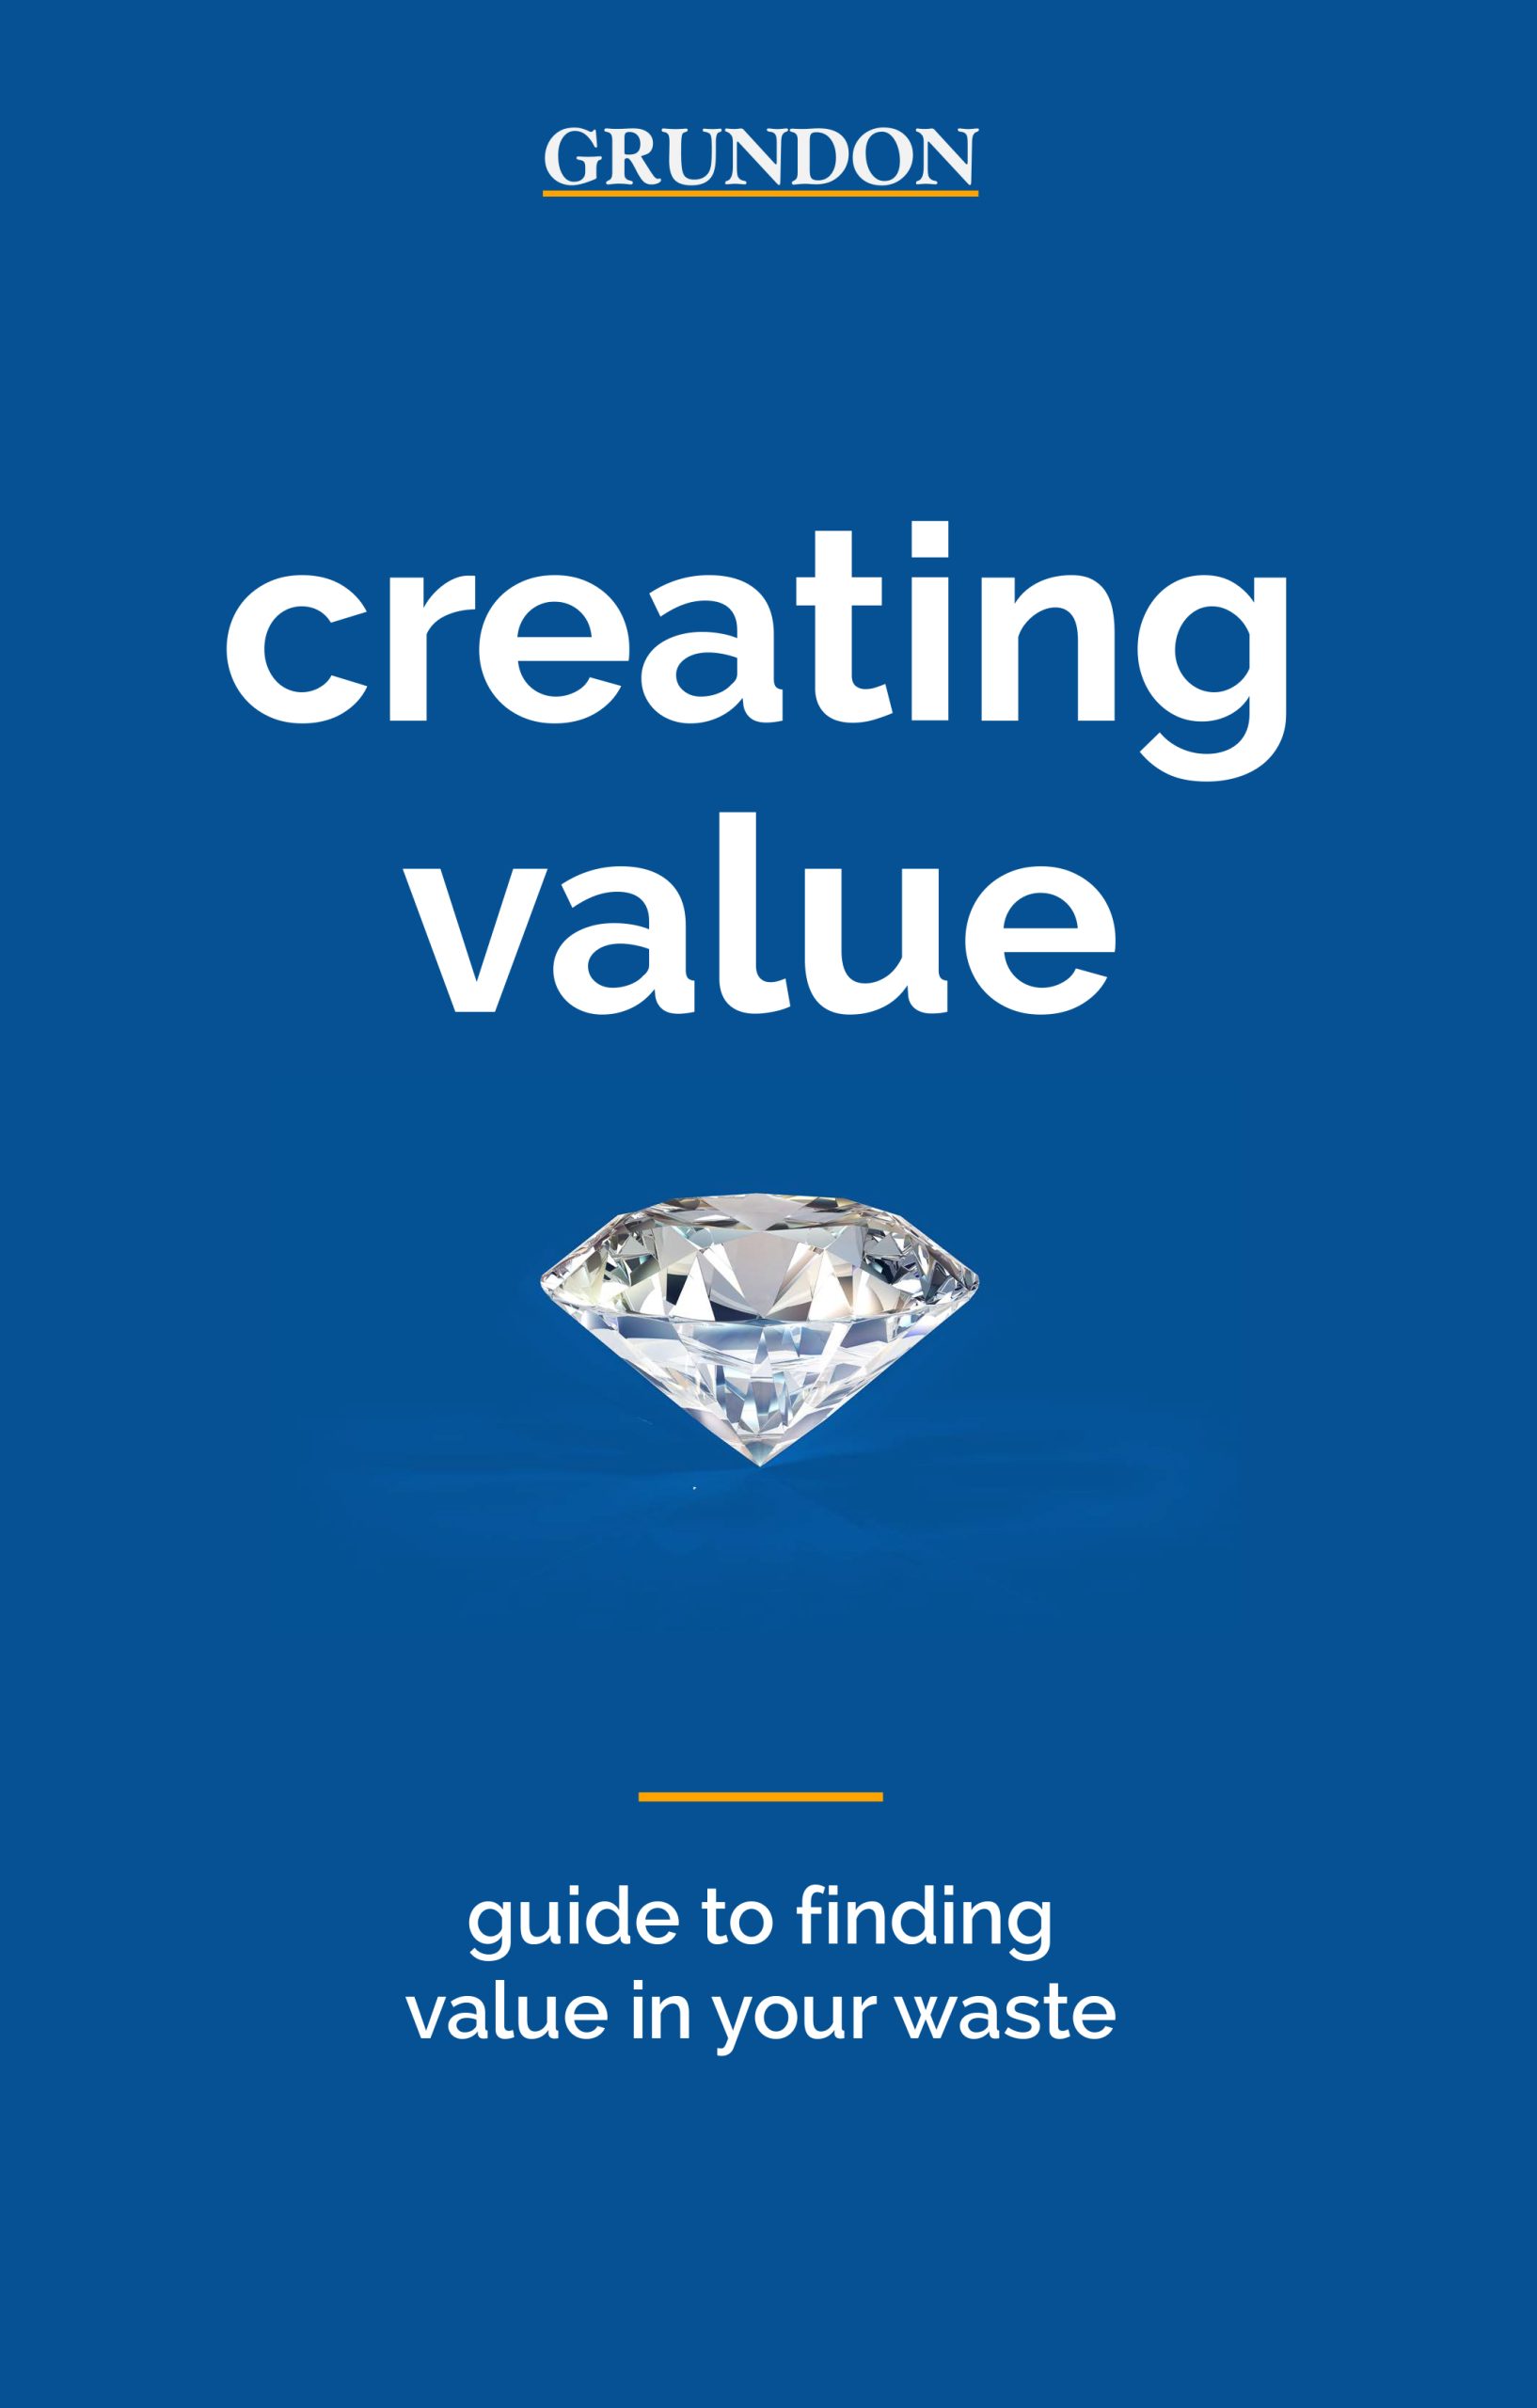 Guide to finding value in your waste